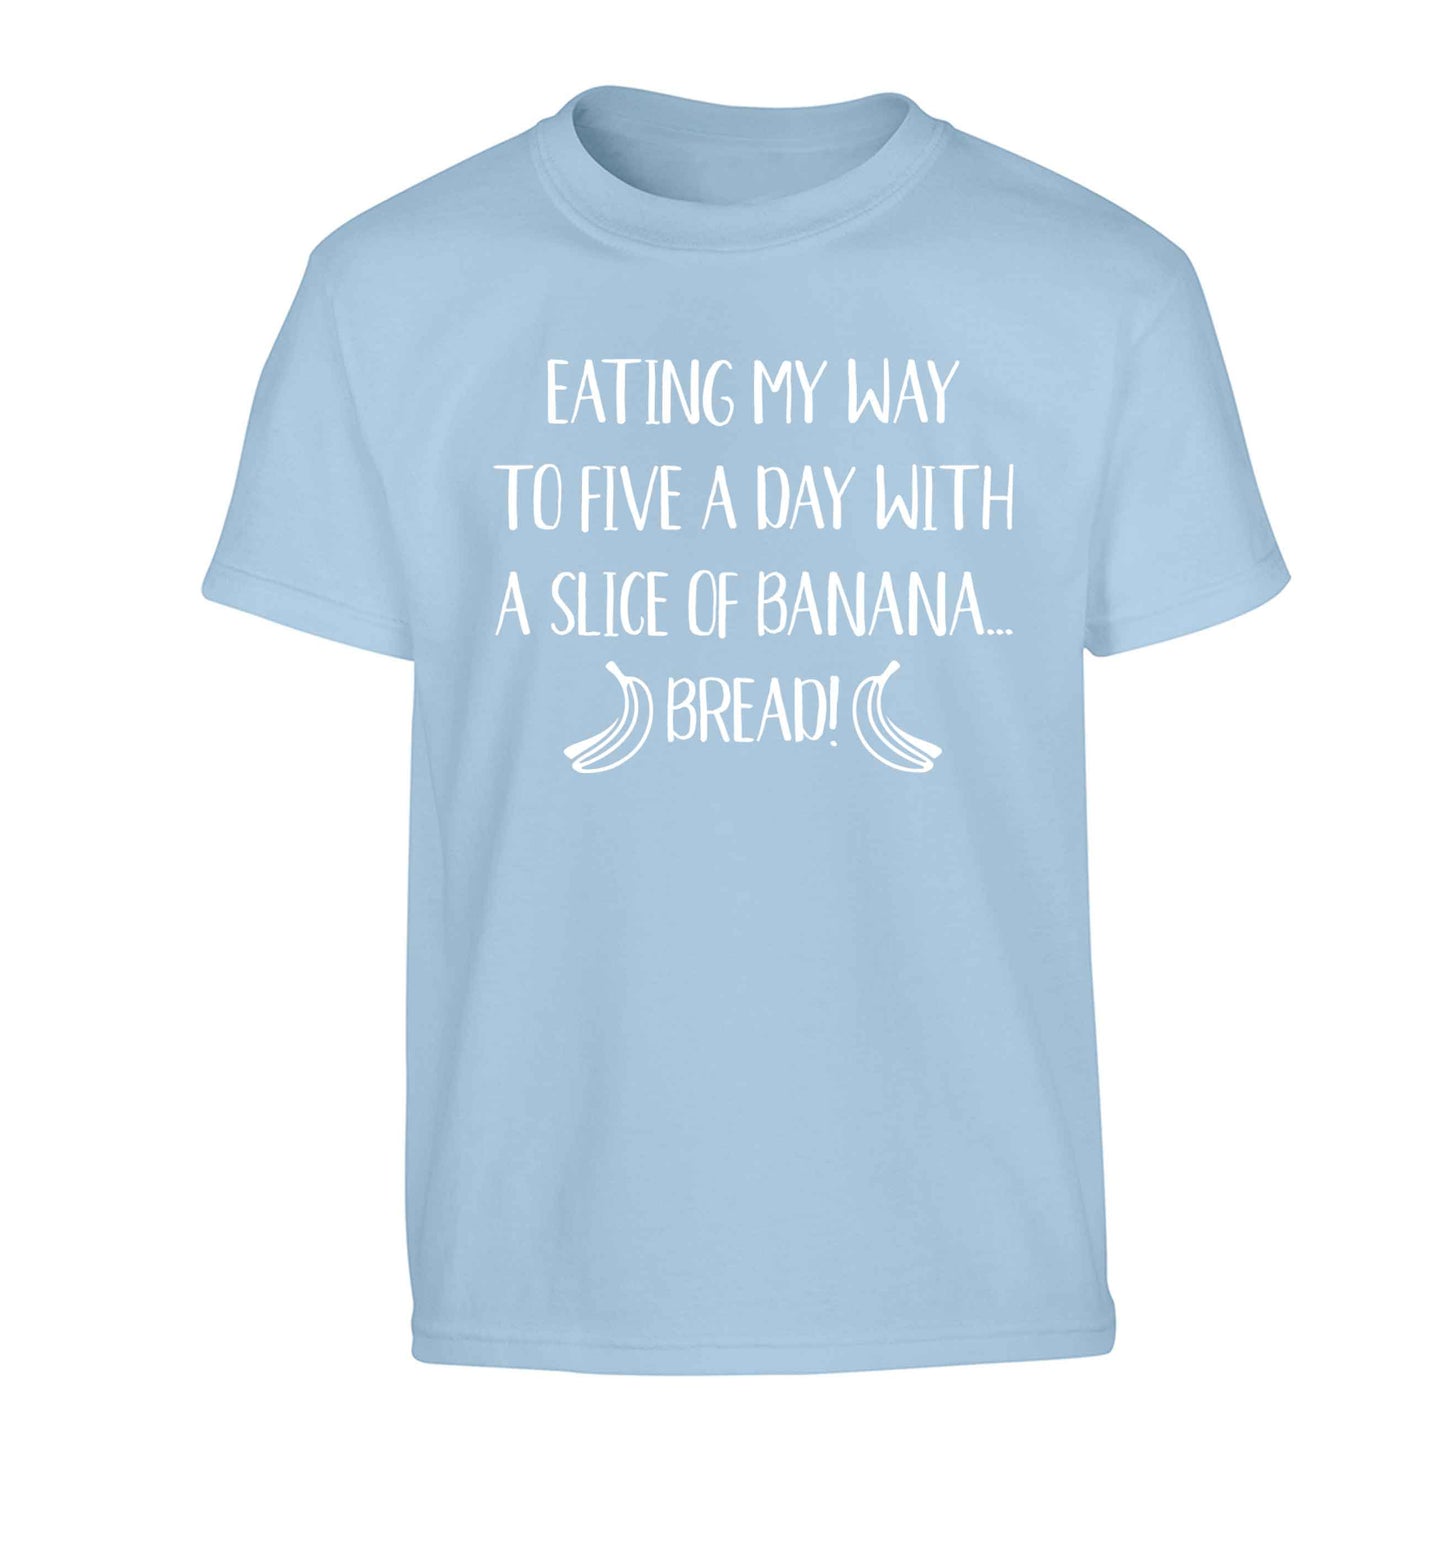 Eating my way to five a day with a slice of banana bread Children's light blue Tshirt 12-13 Years